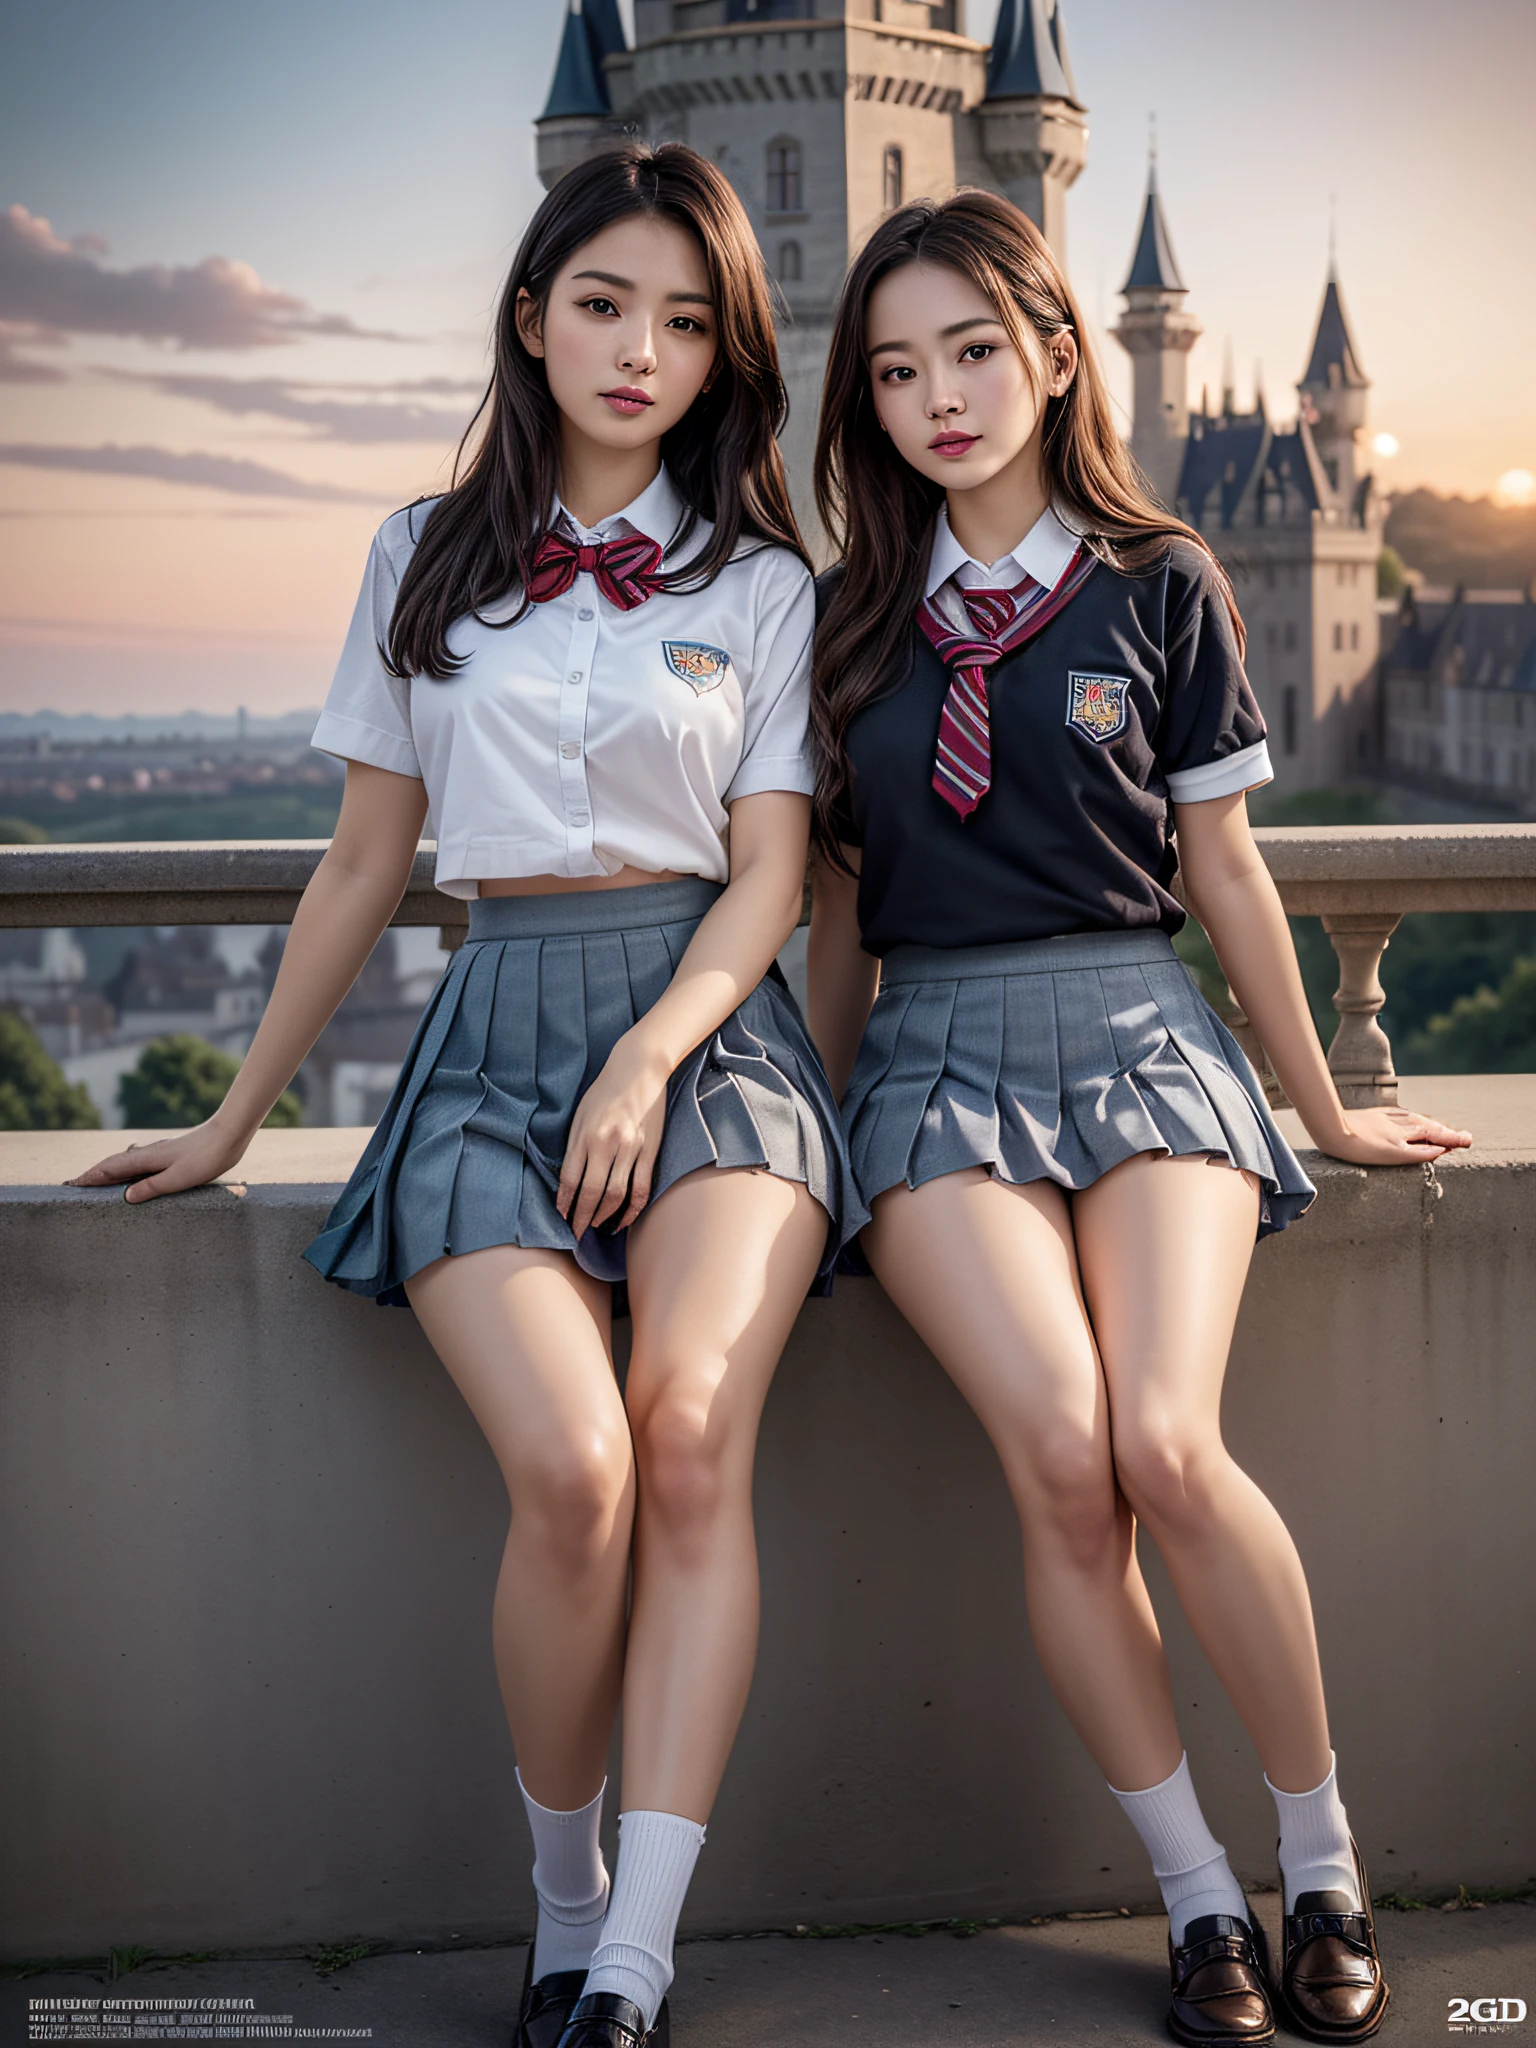 (2girls:1.5), Extremely cute, Amazing face and eyes, (Best Quality:1.4), (hyper quality), (Ultra-detailed), (school uniform, pleated mini skirt:1.5), (beautiful breasts:1.1), (slender body:1.1), Authentic skin texture, bright and shiny lips, Beautiful Goddess Advent, (sitting, spread legs open), (pubick hair, cameltoe), Beautiful background, Golden ratio, conceptual art, Super Detail, ccurate, high details, Outdoors, (Beautiful Giant Castle:1.5), Sexy Art, Surrounded by beautiful sunsets, dazzling lights, Super delicate illustration details, Highly detailed CG integrated 8k wallpapers, RAW Photos, professional photograpy, Cinematic lighting, Super gorgeous illustrations, depth of field,